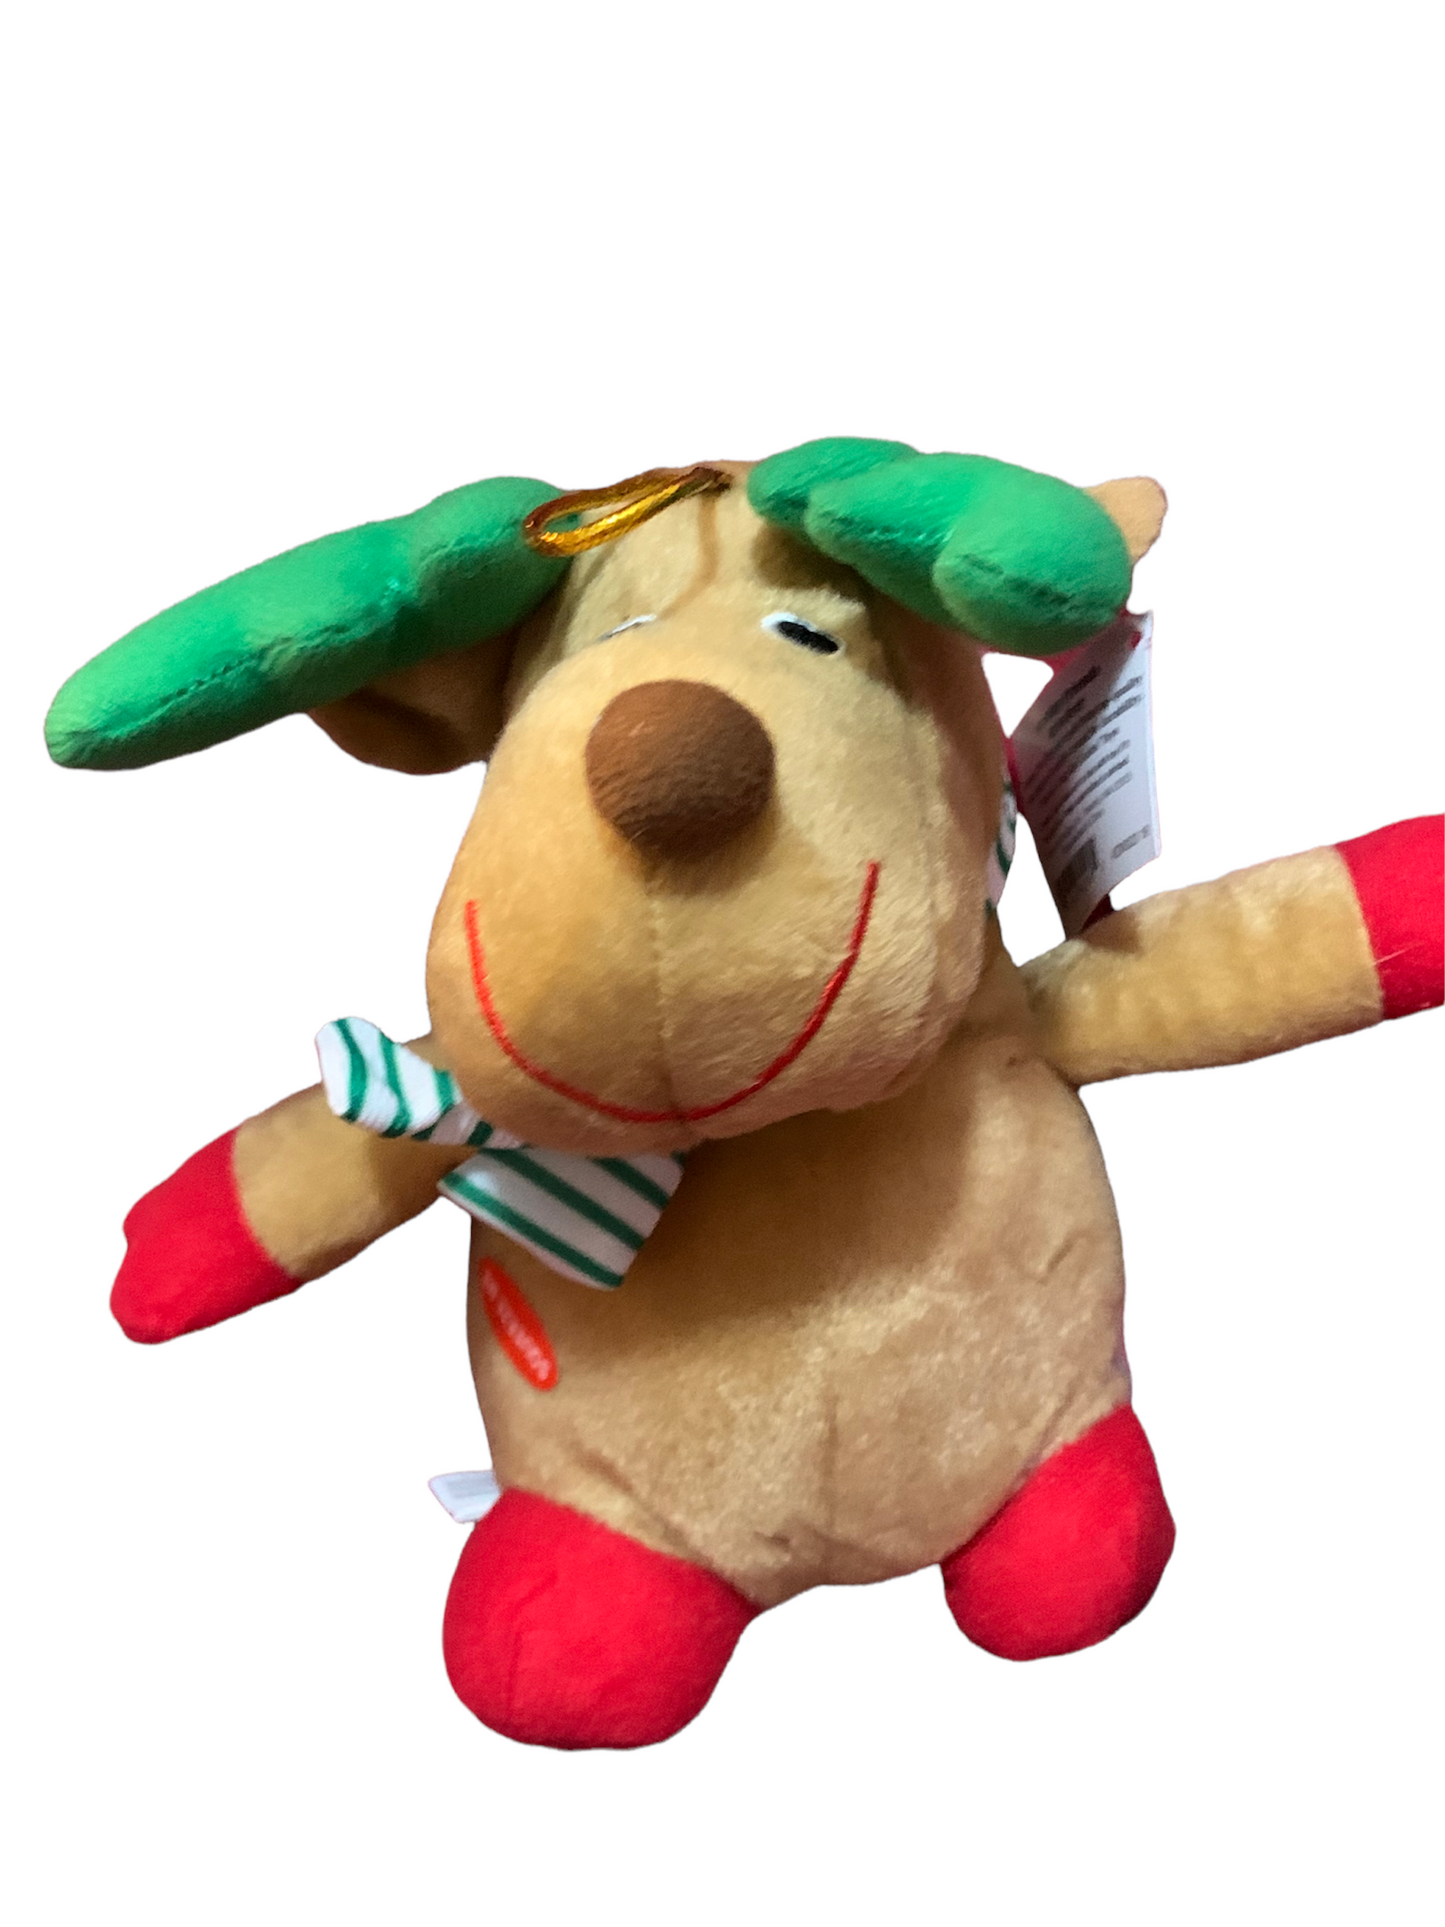 Reindeer Dog Toy, Musical Toy - Jingle Bells Christmas Song